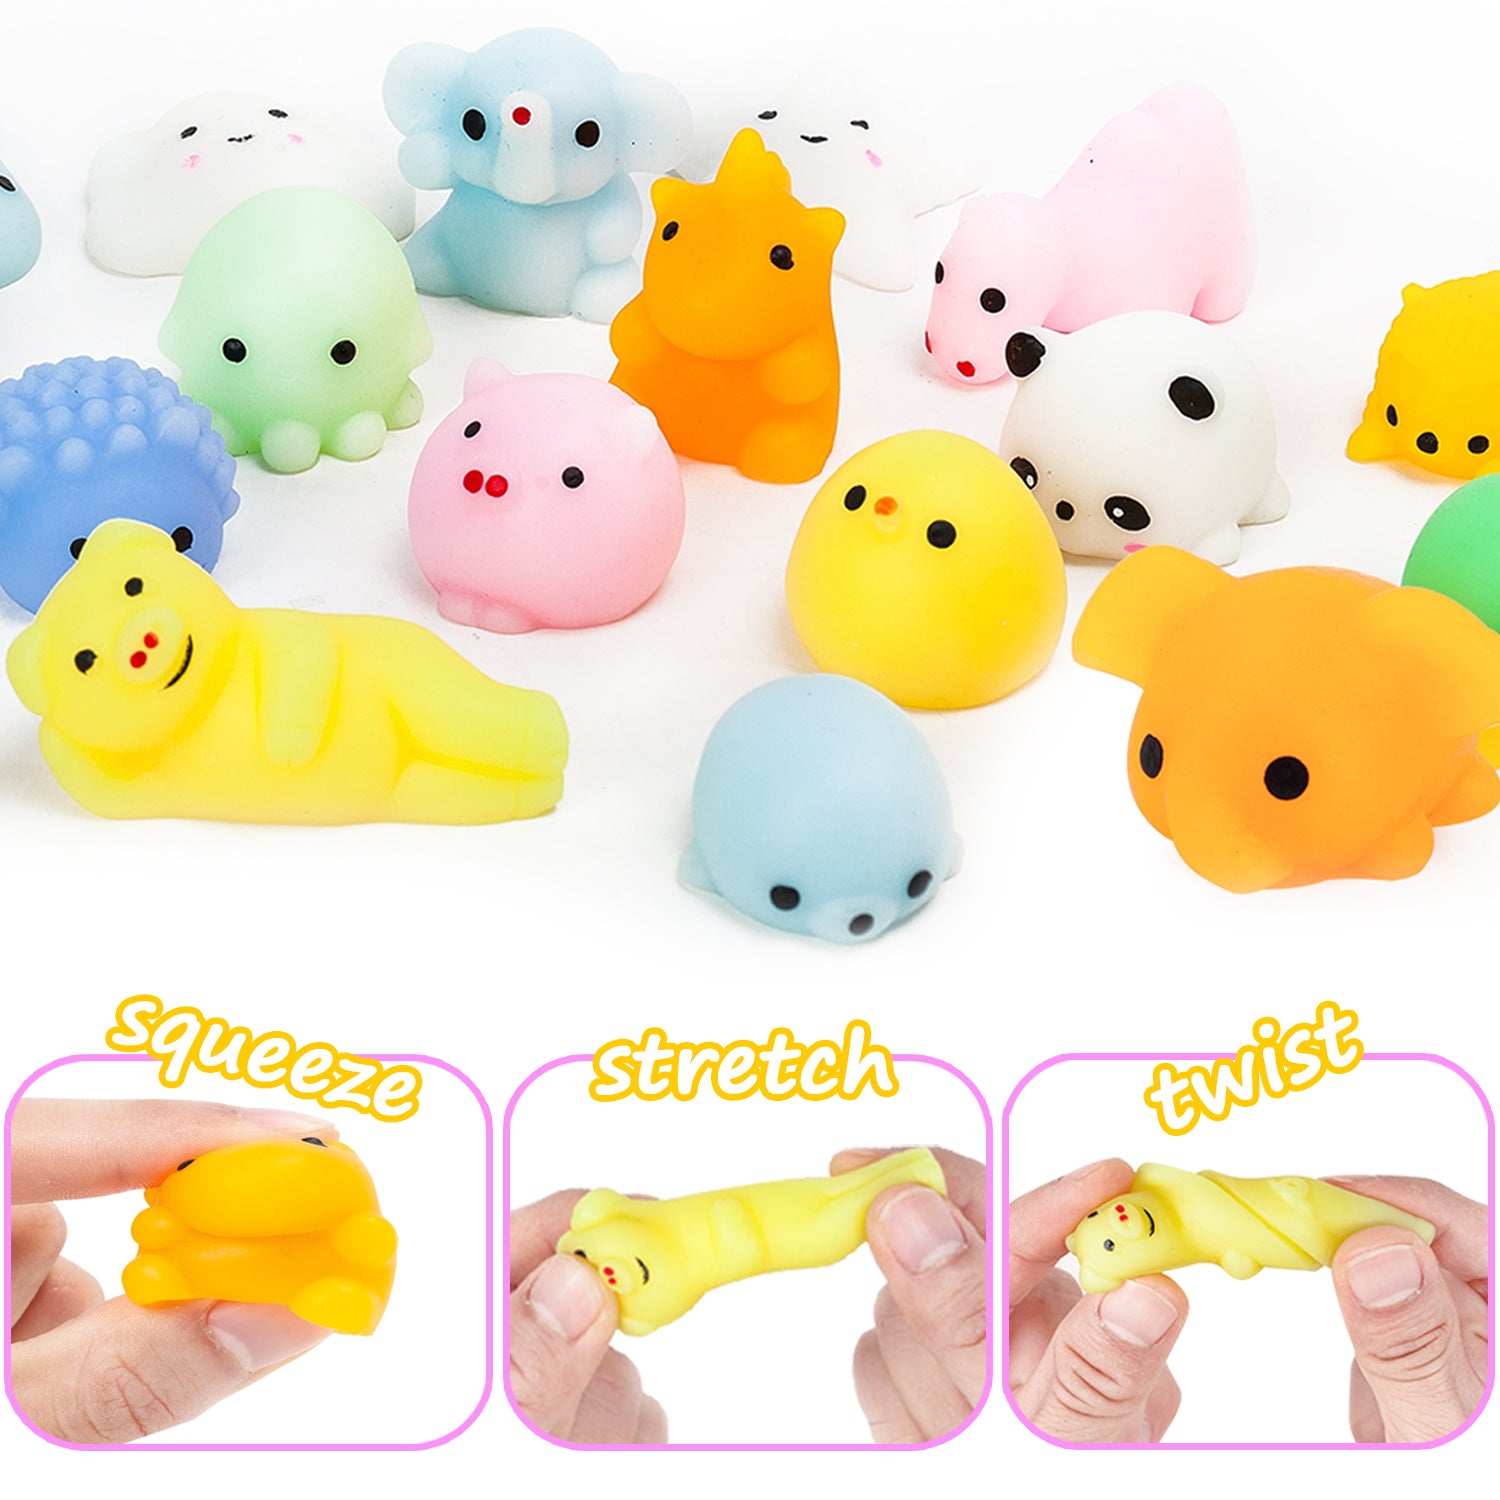 Mochi Squishy Toys, Kawaii Squishies for Kids Party Favors, Mini Animal  Squishies Stress Relief Fidget Toys for Boys & Girls Birthday Gifts,  Classroom Prize, Goodie Bags Stuffers